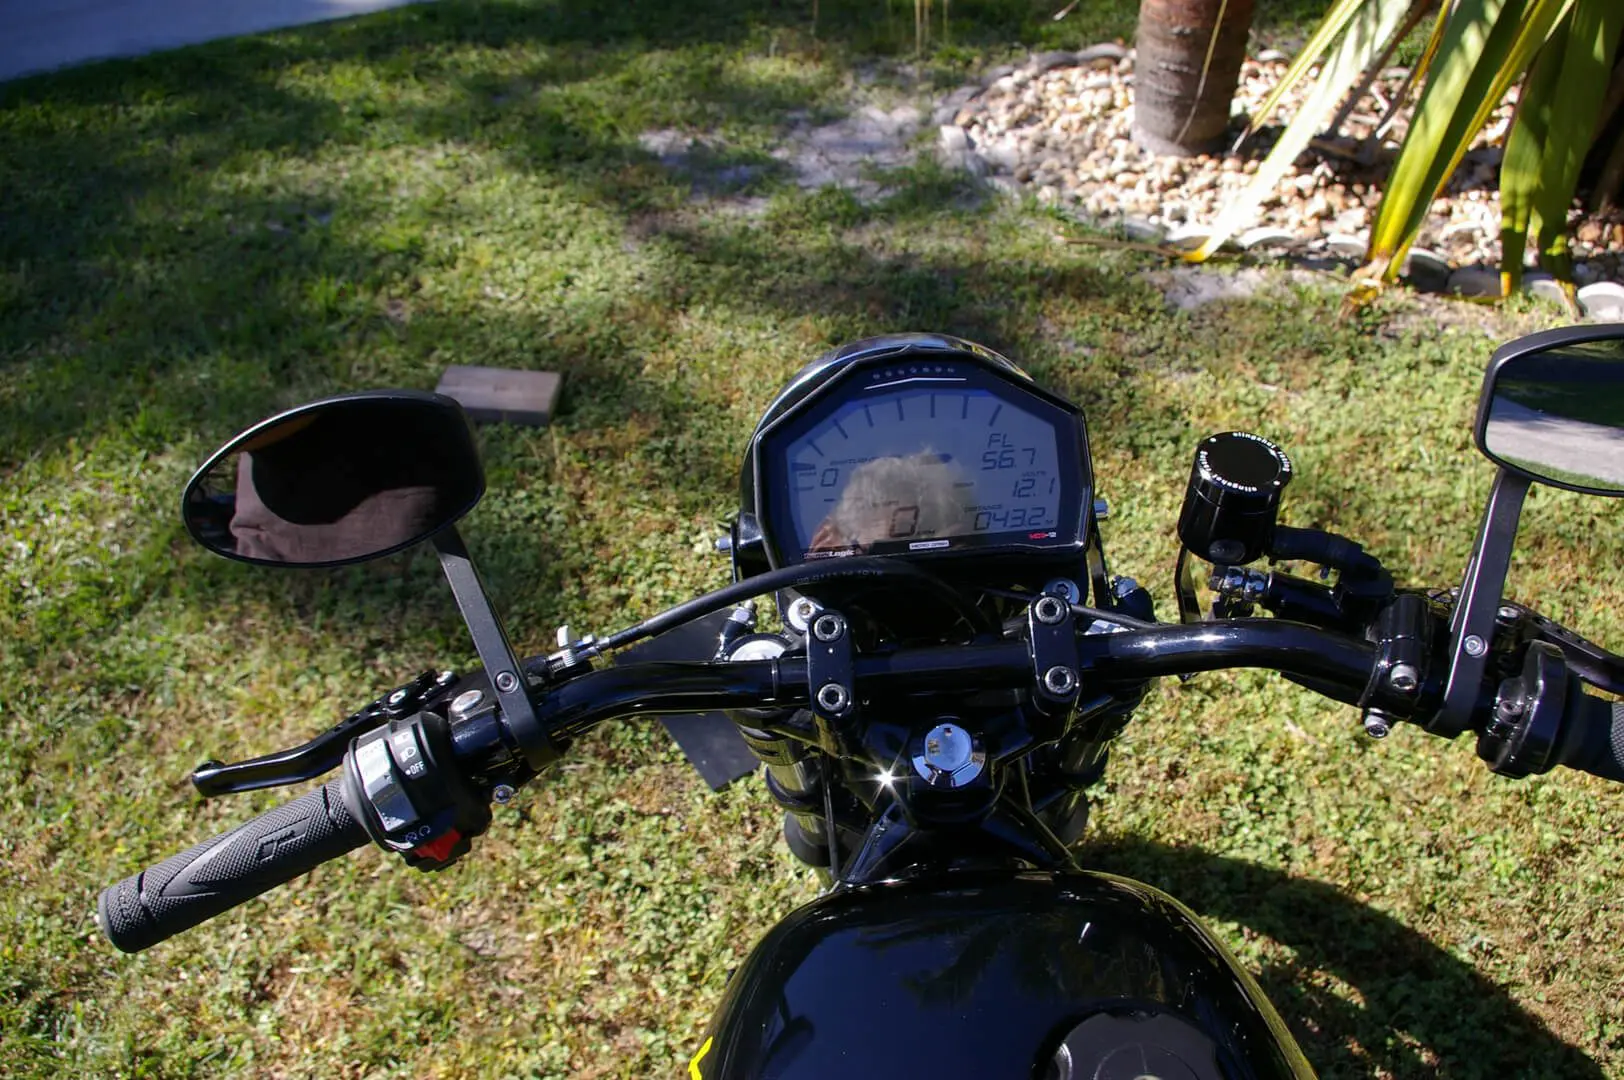 A motorcycle is parked in the grass near some bushes.